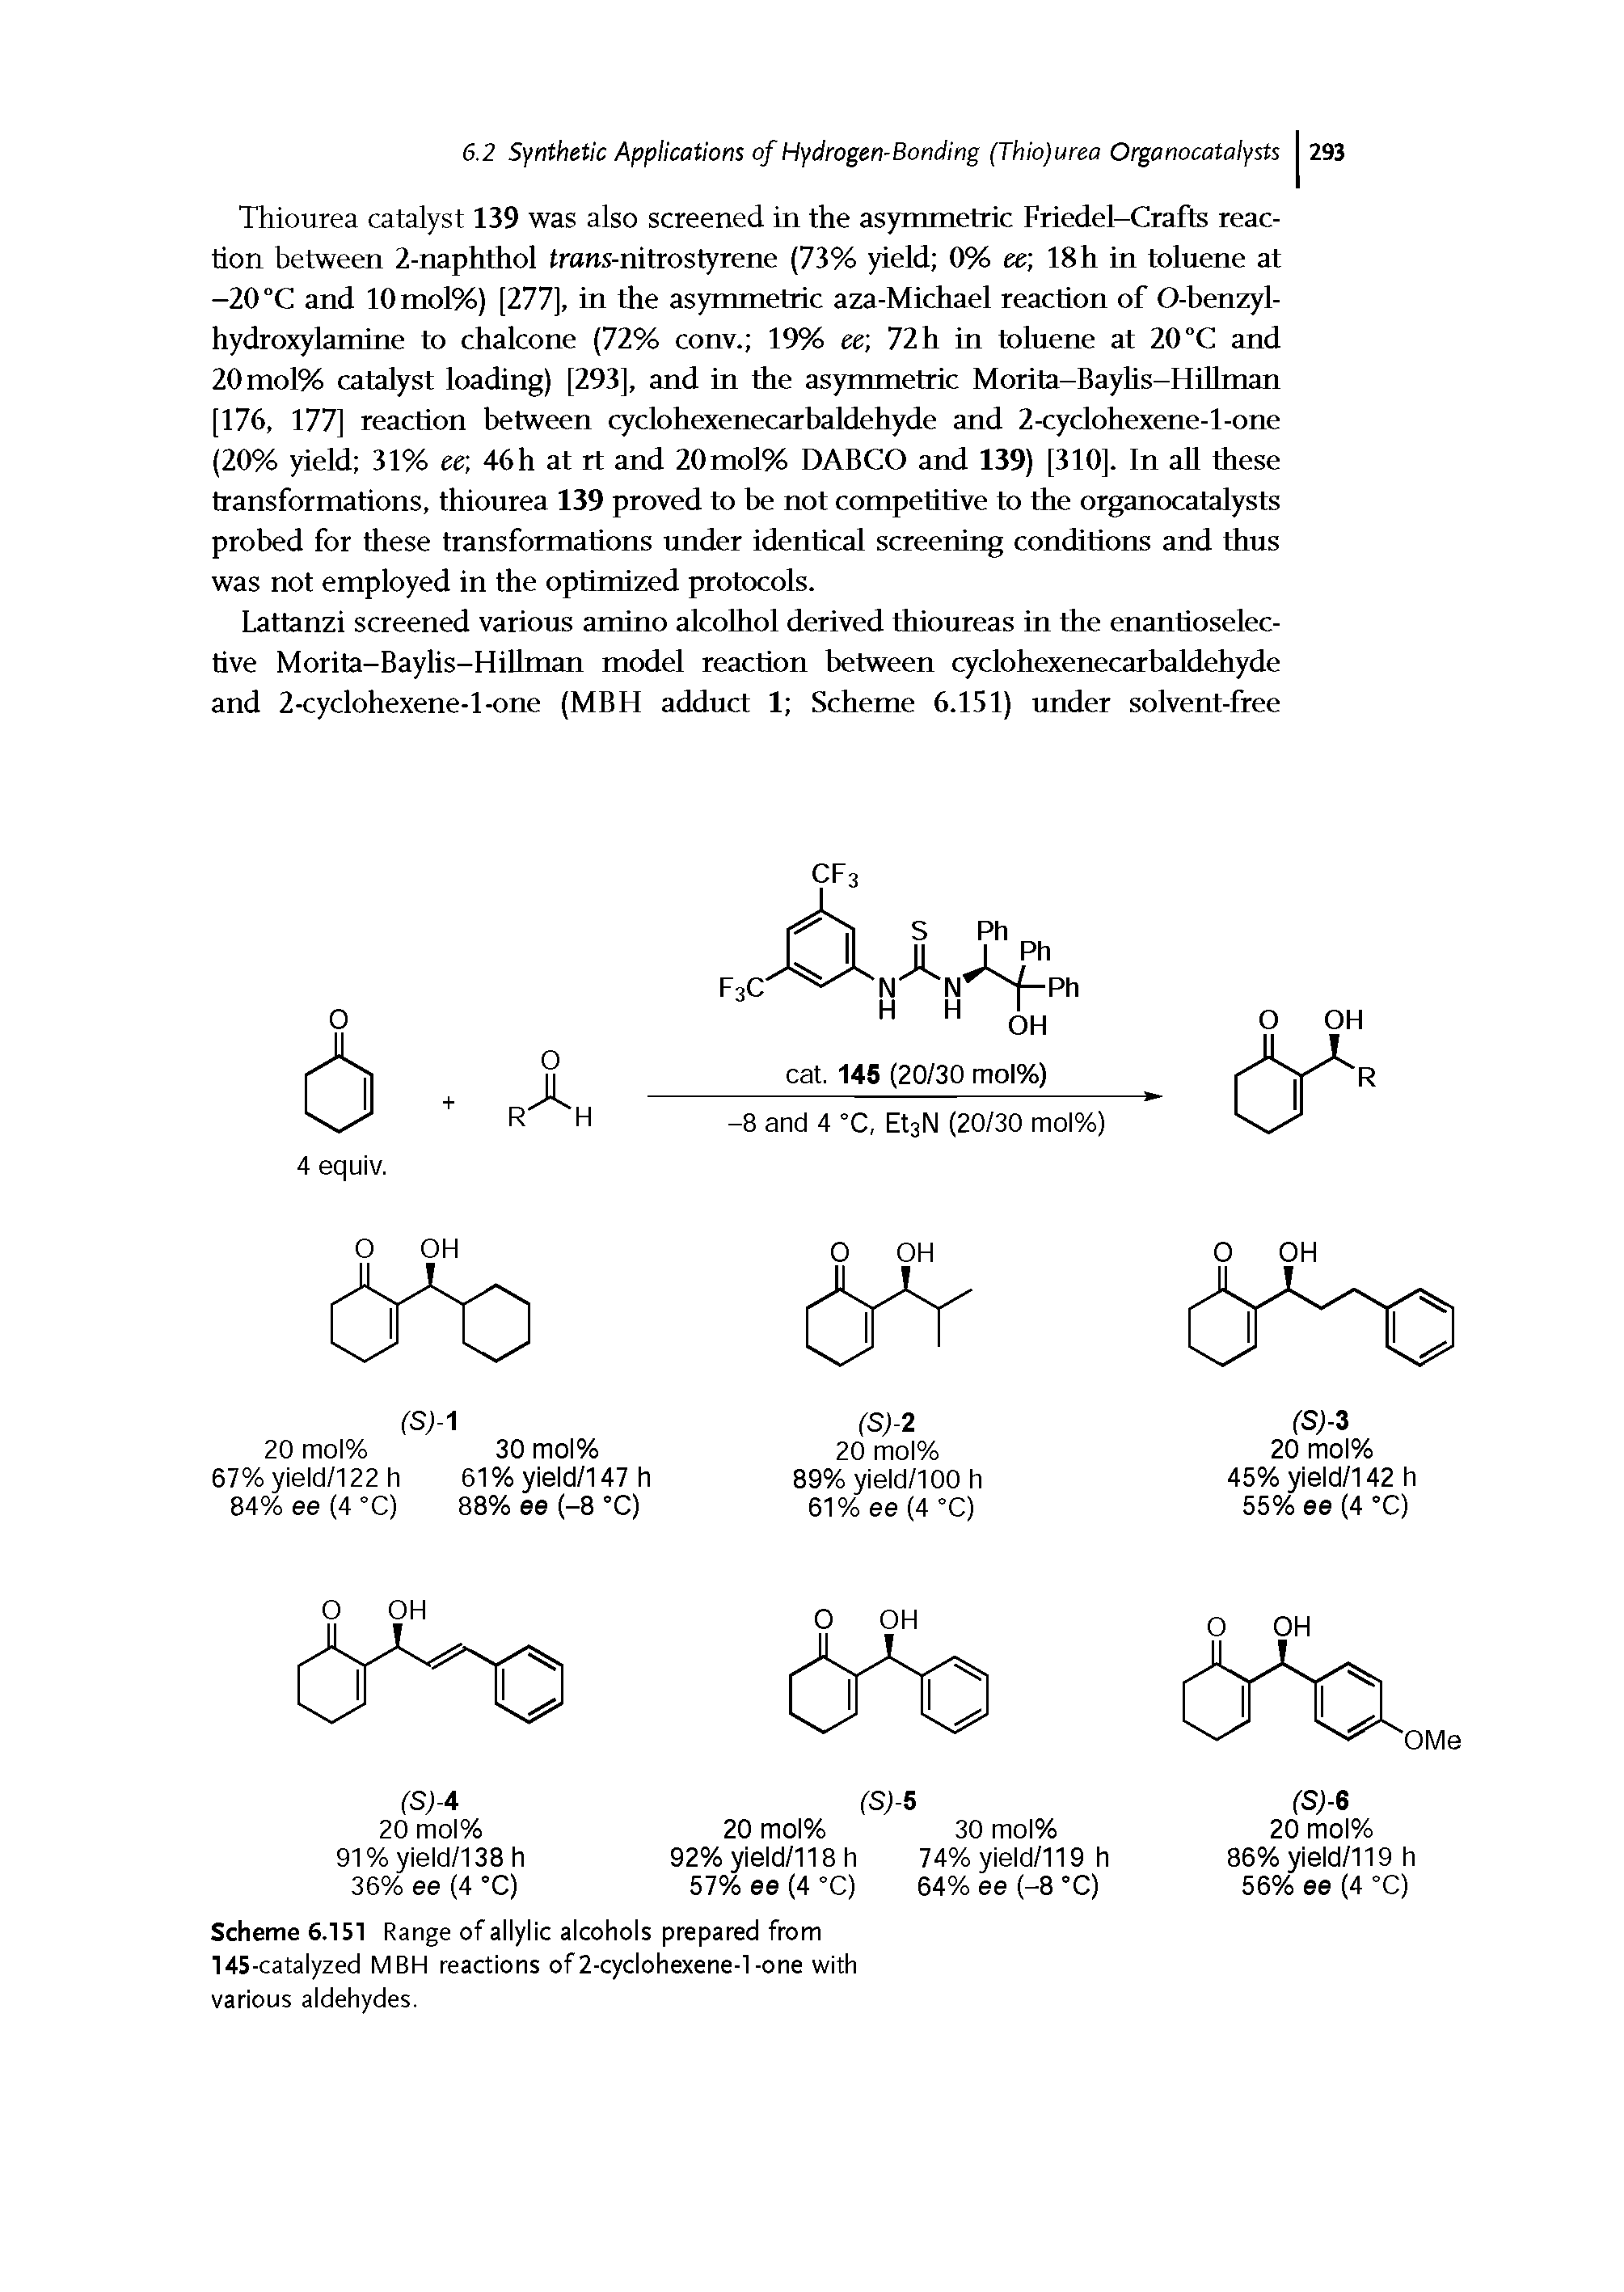 Scheme 6.151 Range of allylic alcohols prepared from 145-catalyzed MBH reactions of2-cyclohexene-l-one with various aldehydes.